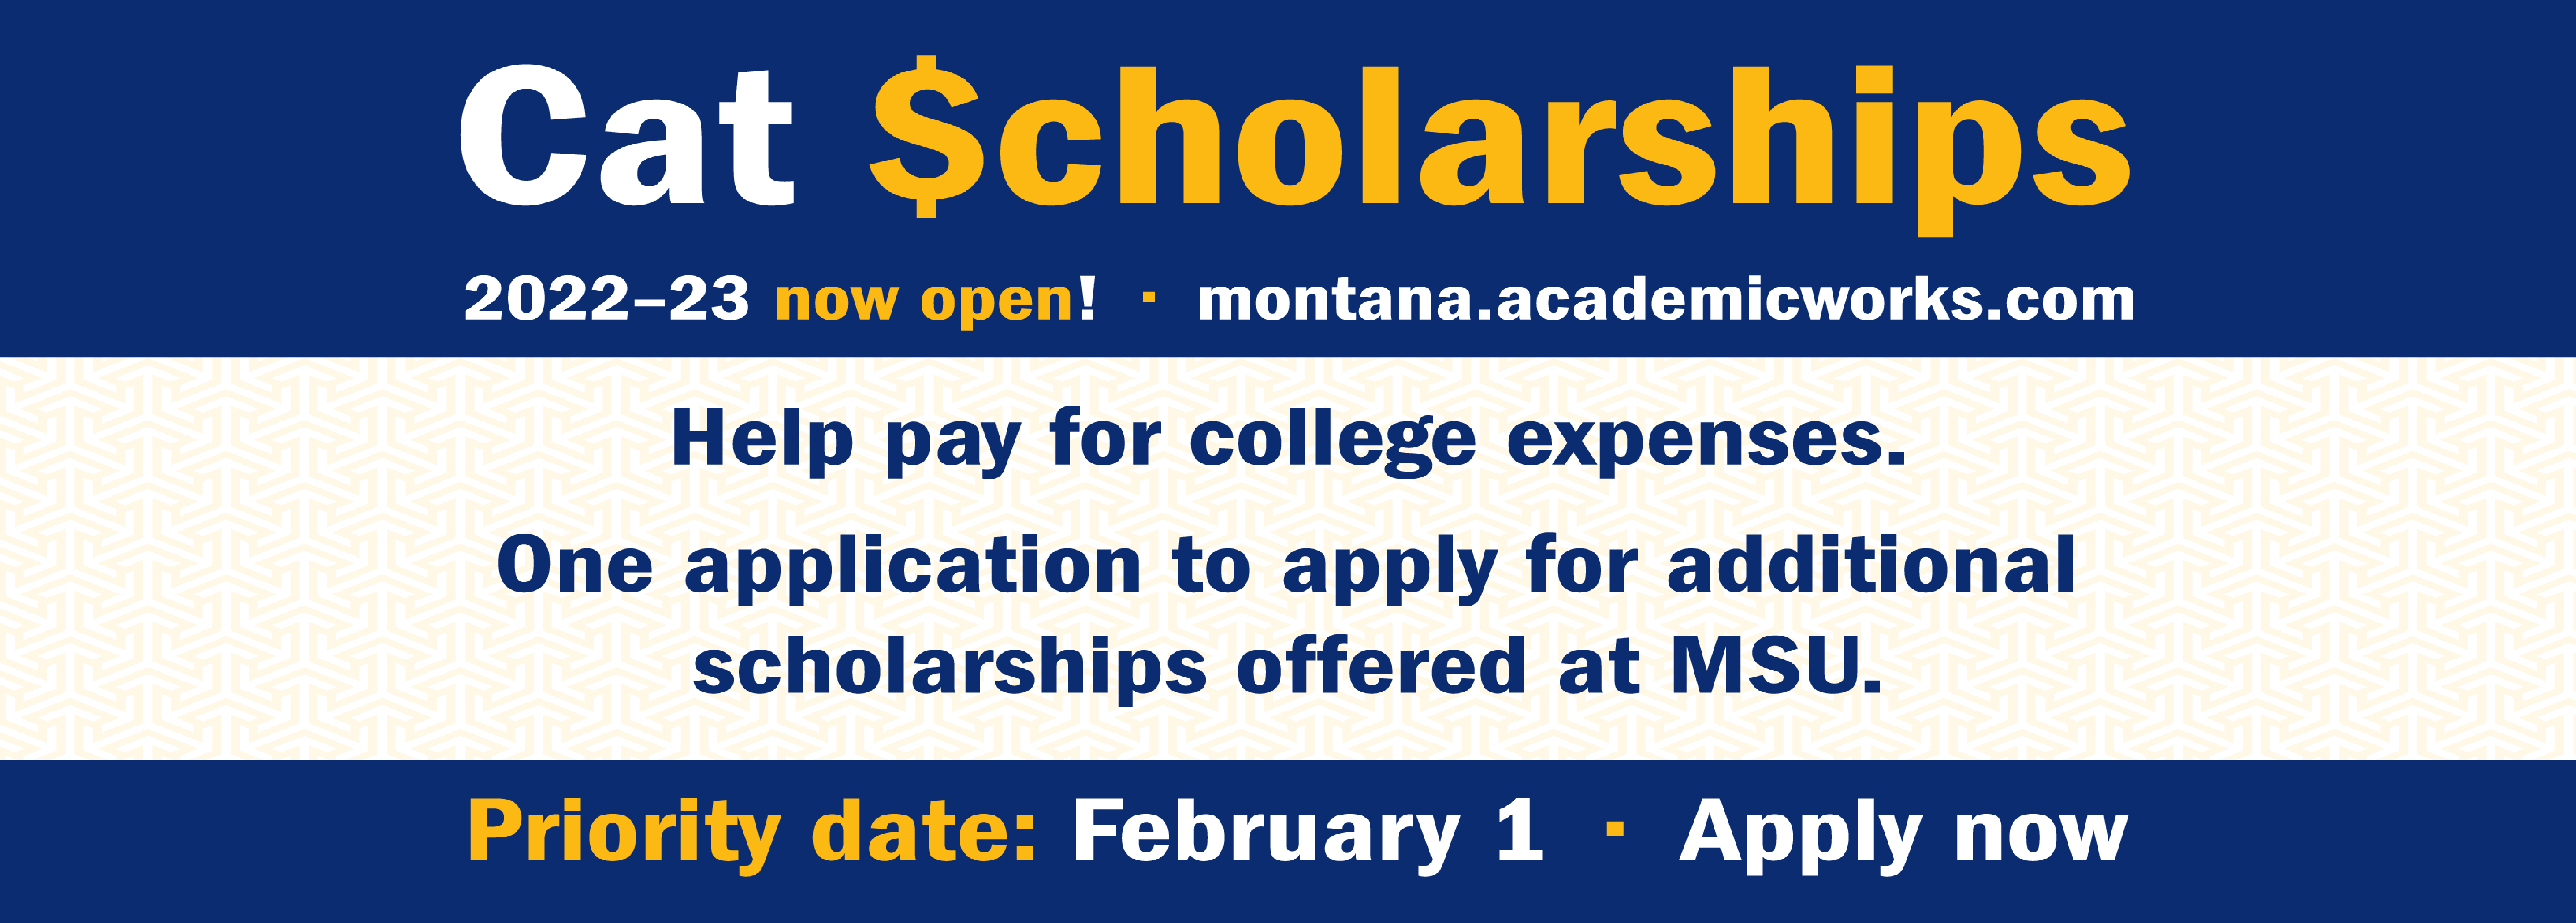 Help pay for college expenses. One application to apply for additional scholarships offered at MSU.